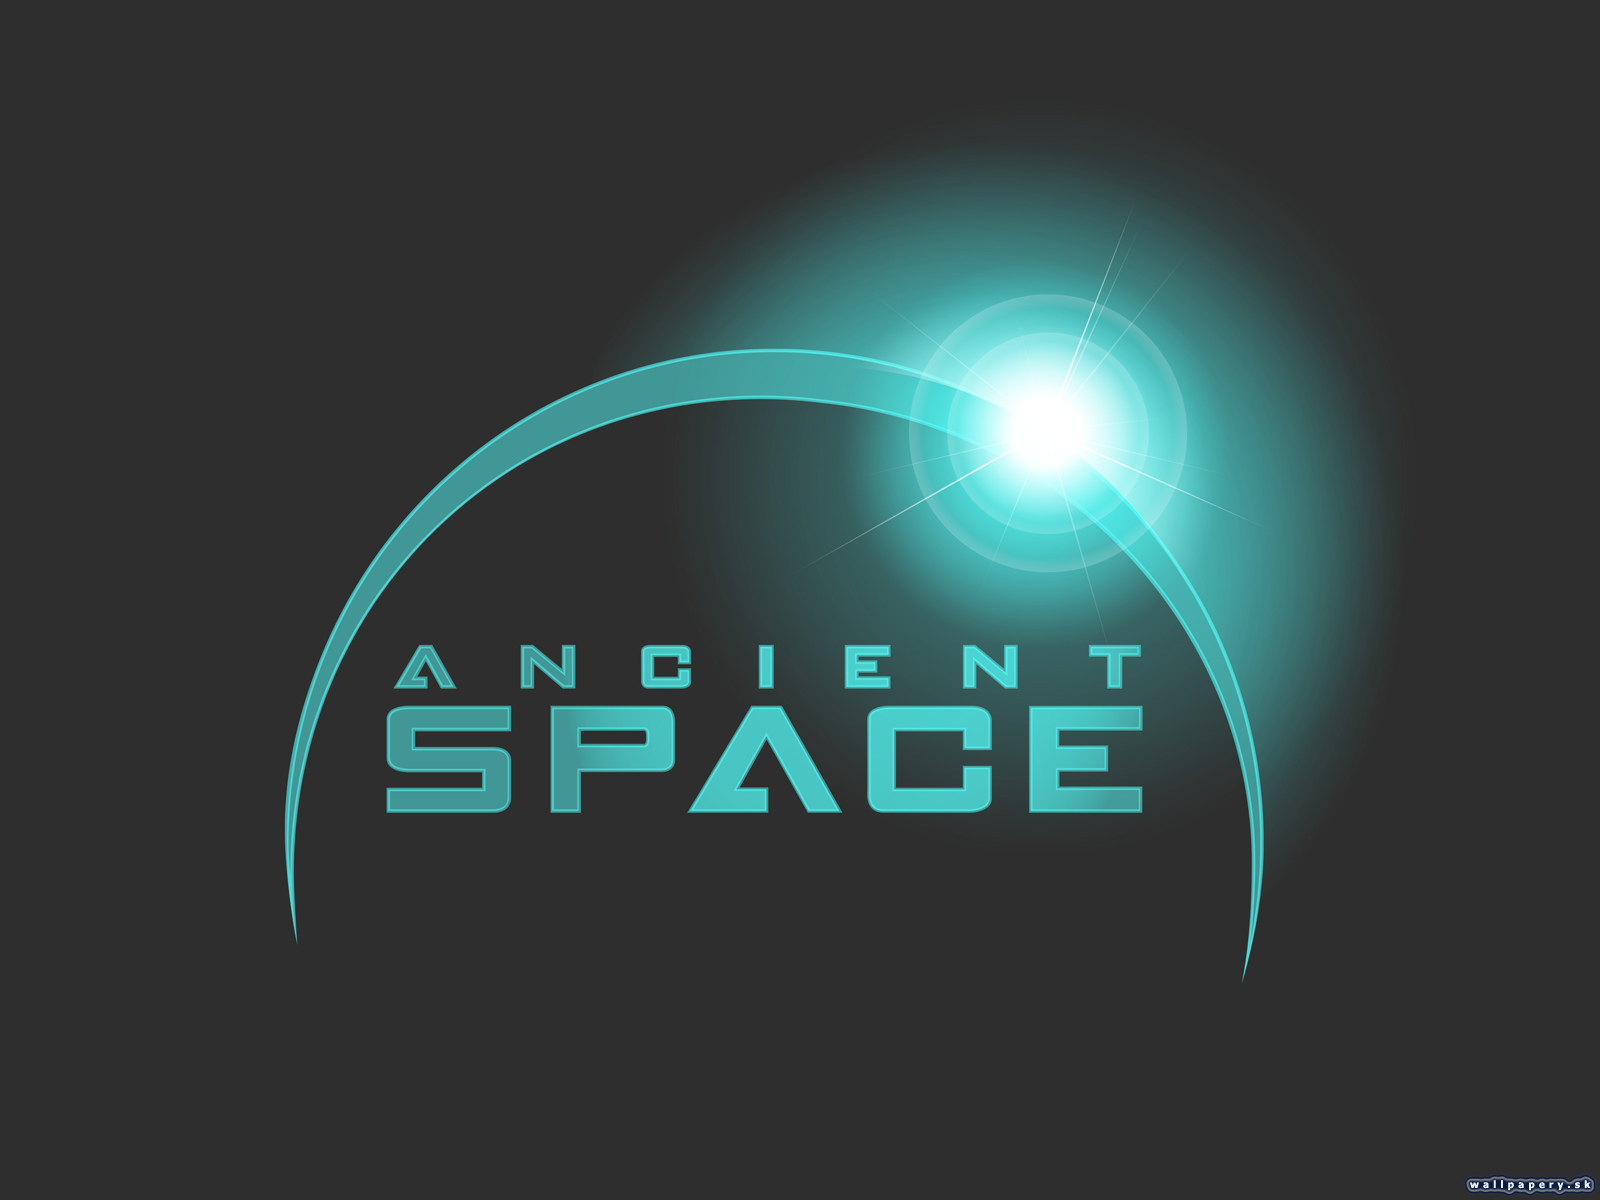 Ancient Space - wallpaper 2